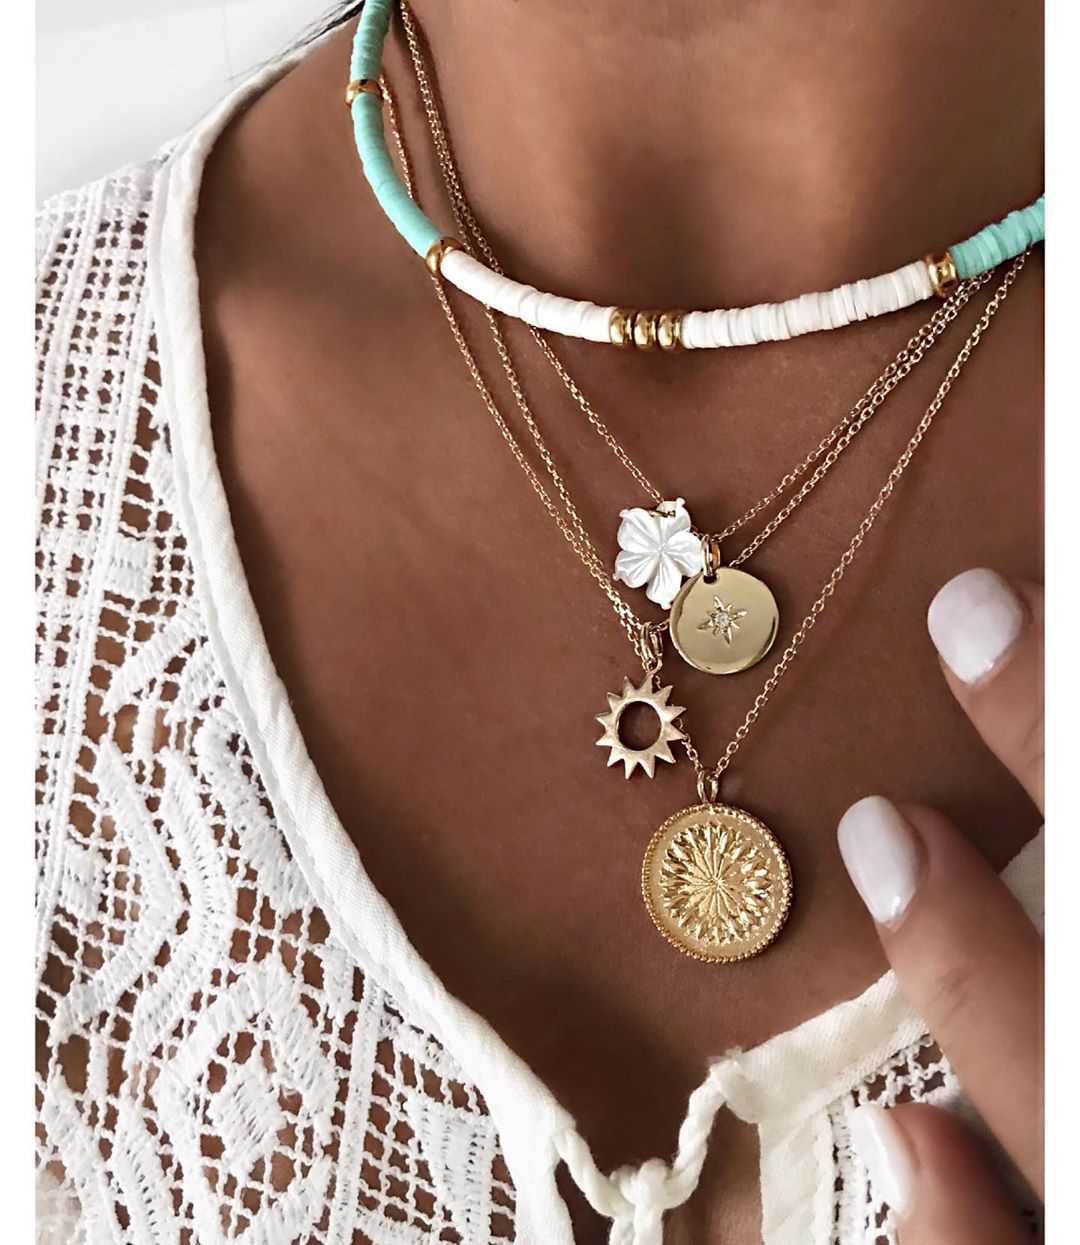 Fashion New Bohemia Soft Clay Shell Star Sun Pendant Chain Layered Necklace for Women Girls Summer Beach Simple Layered Necklace - Charlie Dolly